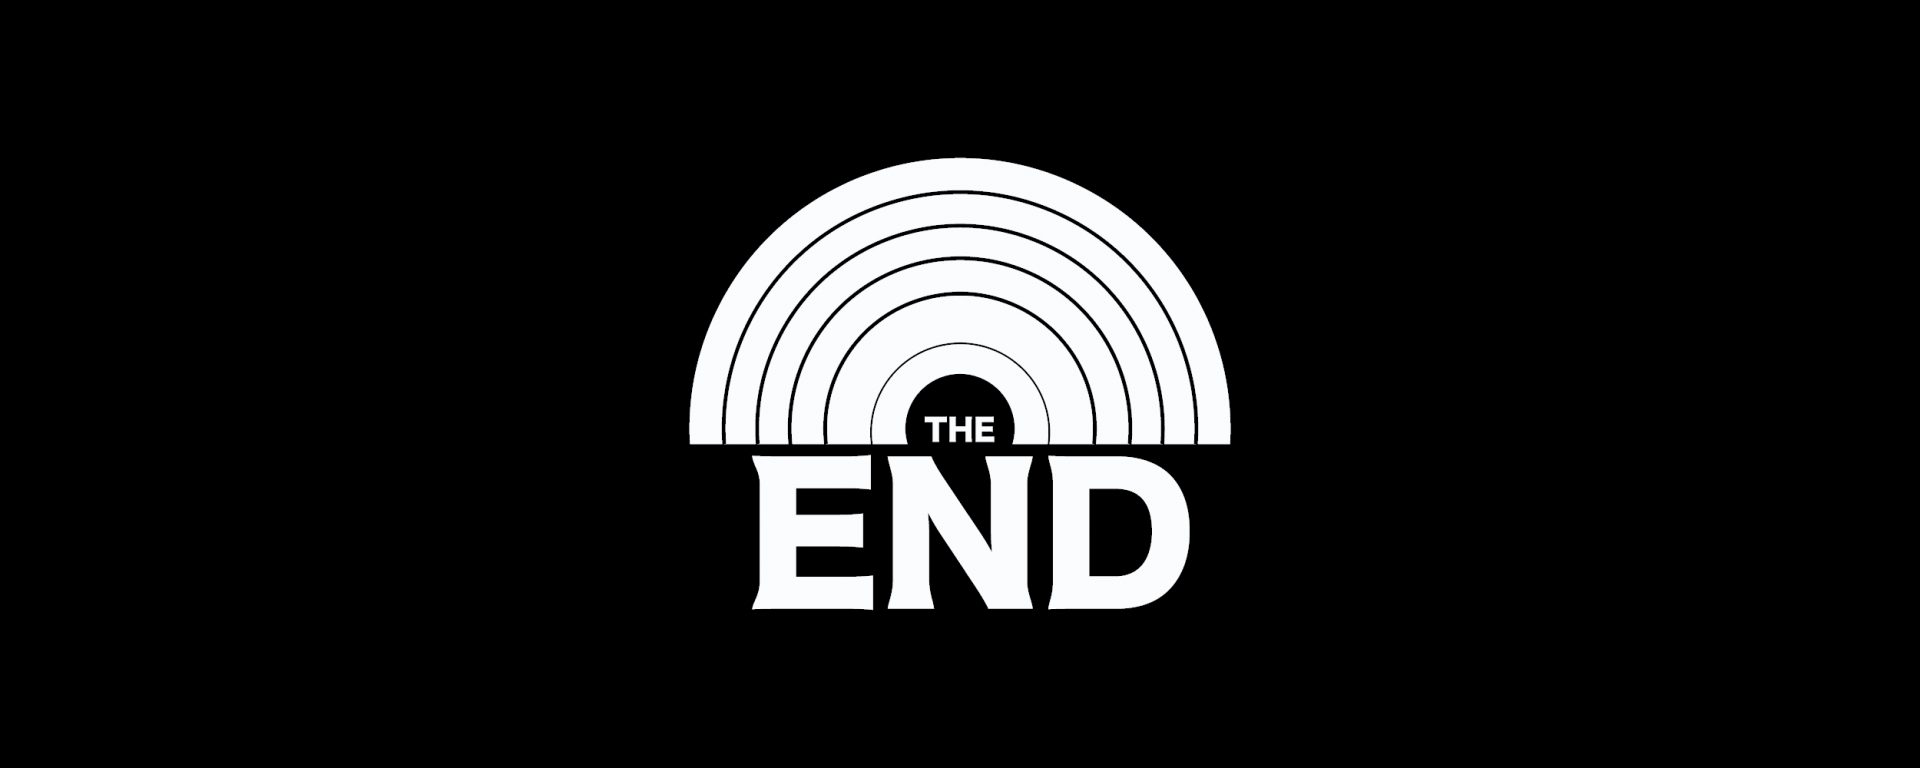 The Find. The End.